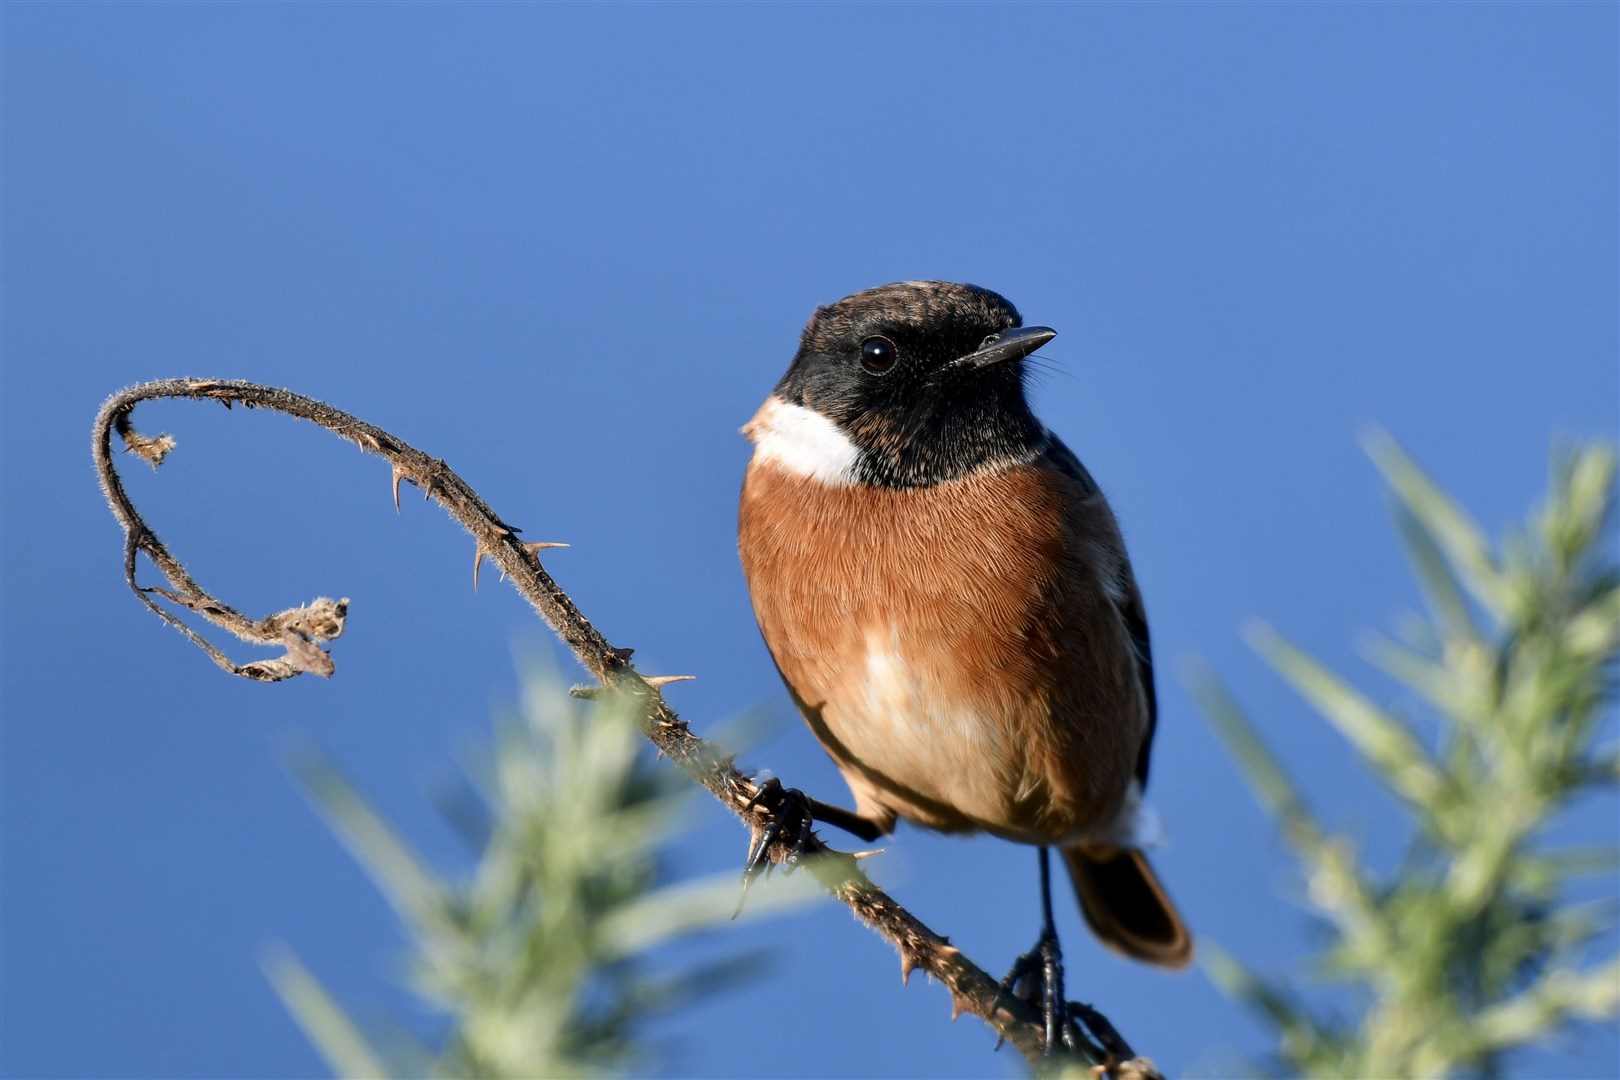 Hazel Thomson spotted this stonechat in Burghead while walking along the shore.